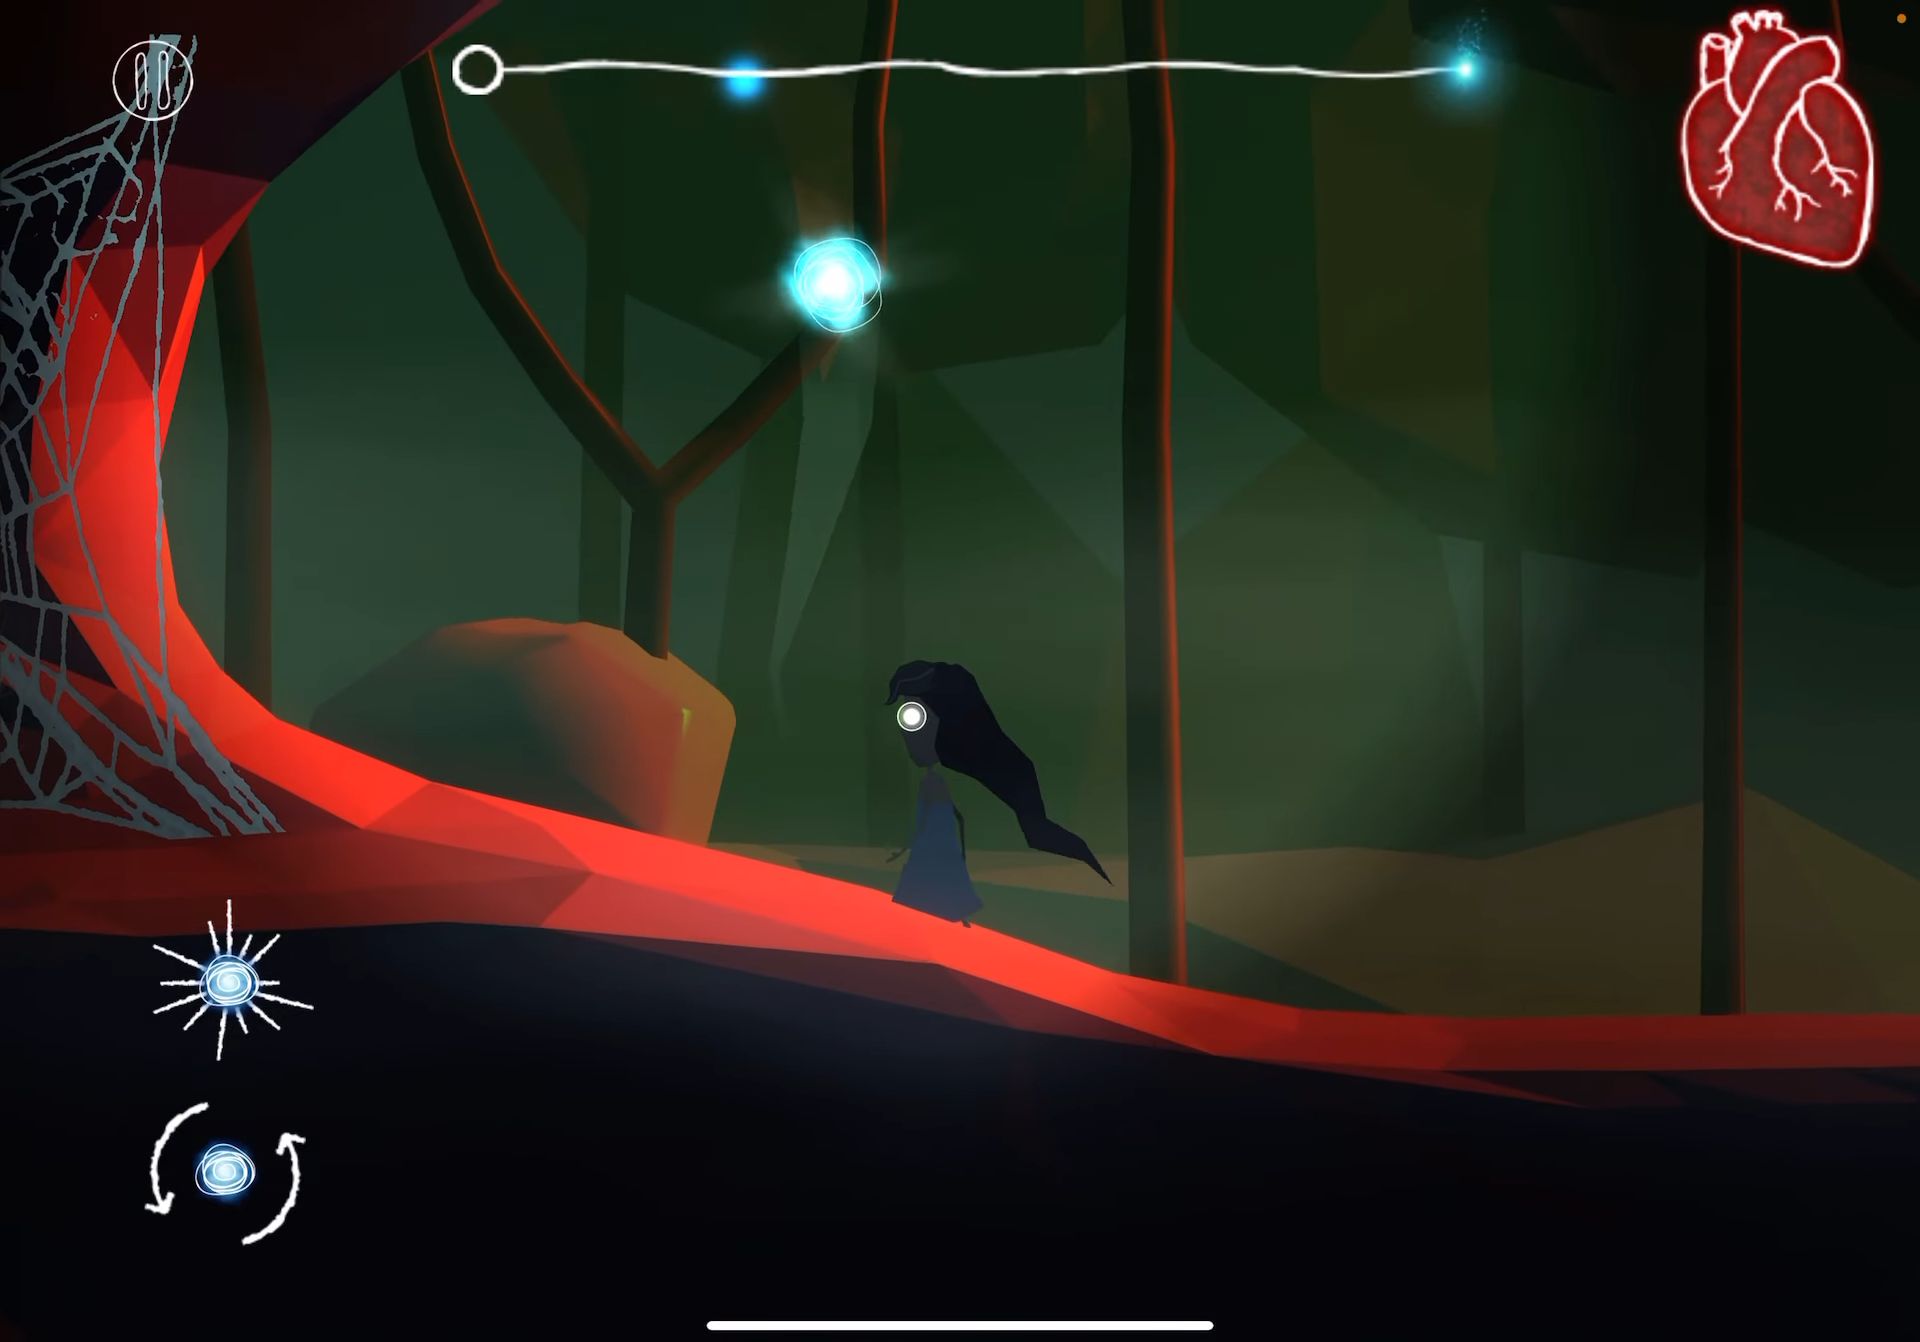 Selma and the Wisp - Android game screenshots.